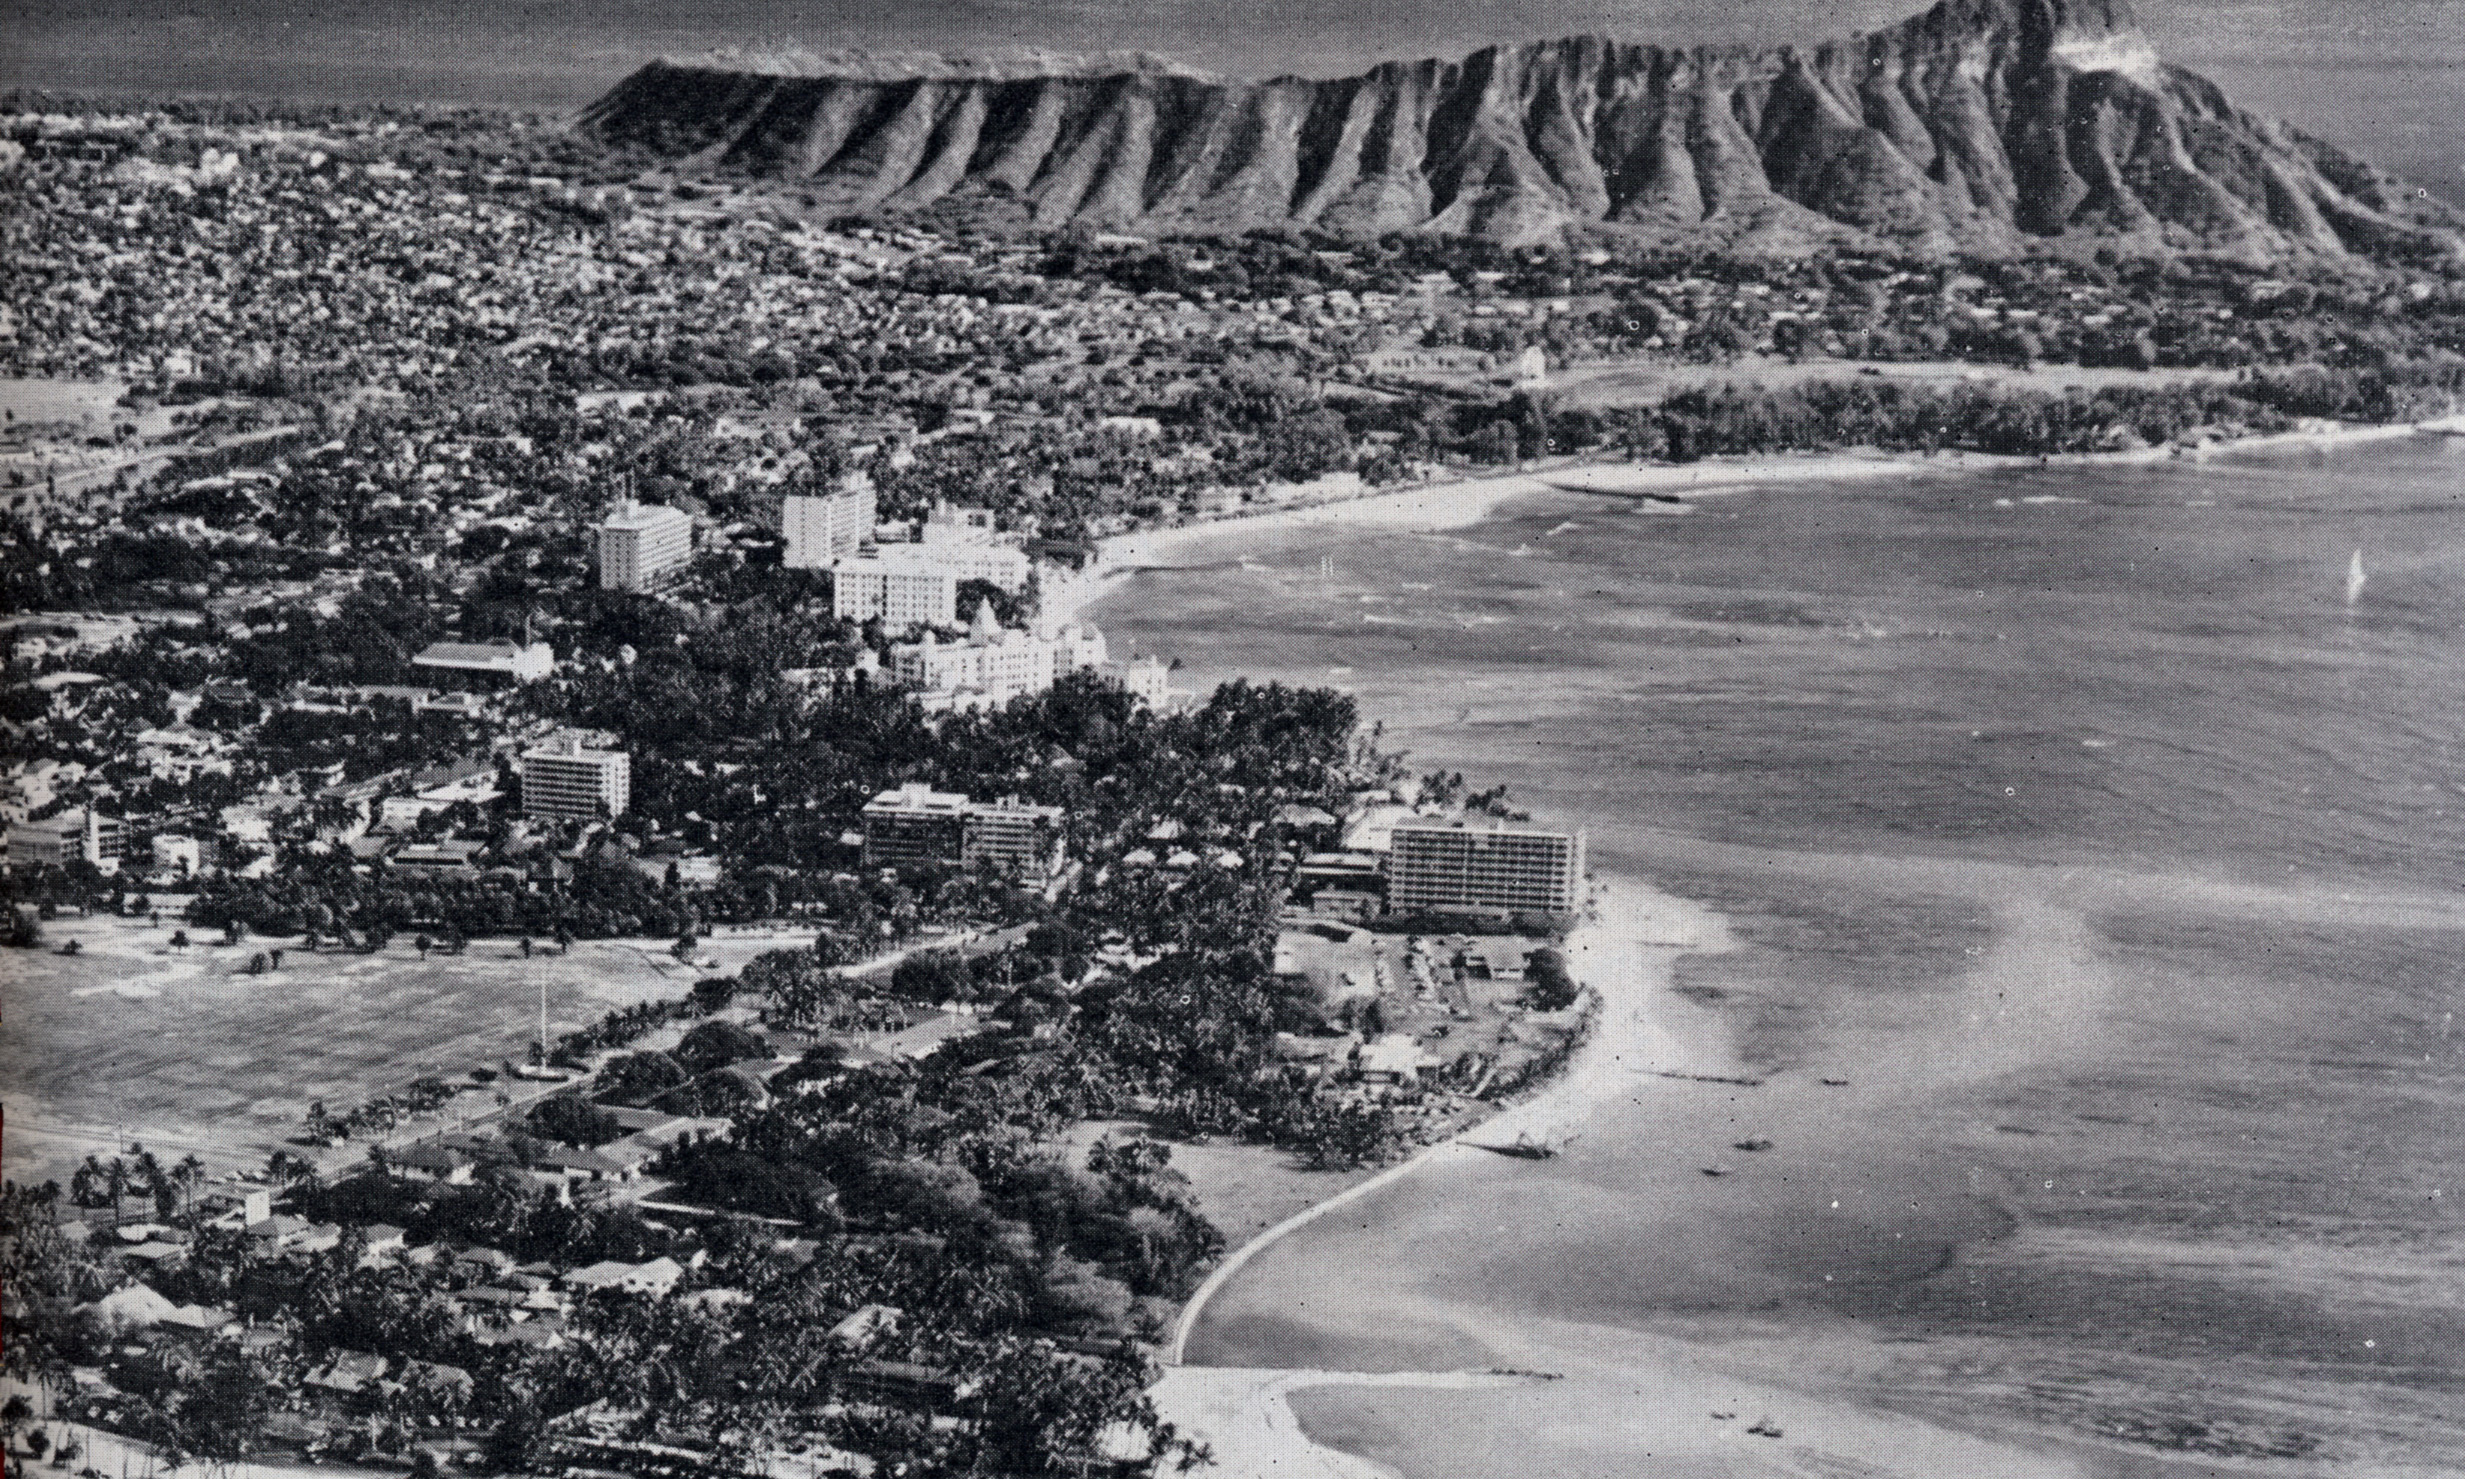 Outrigger Waikiki Beach Resort in the 1960s